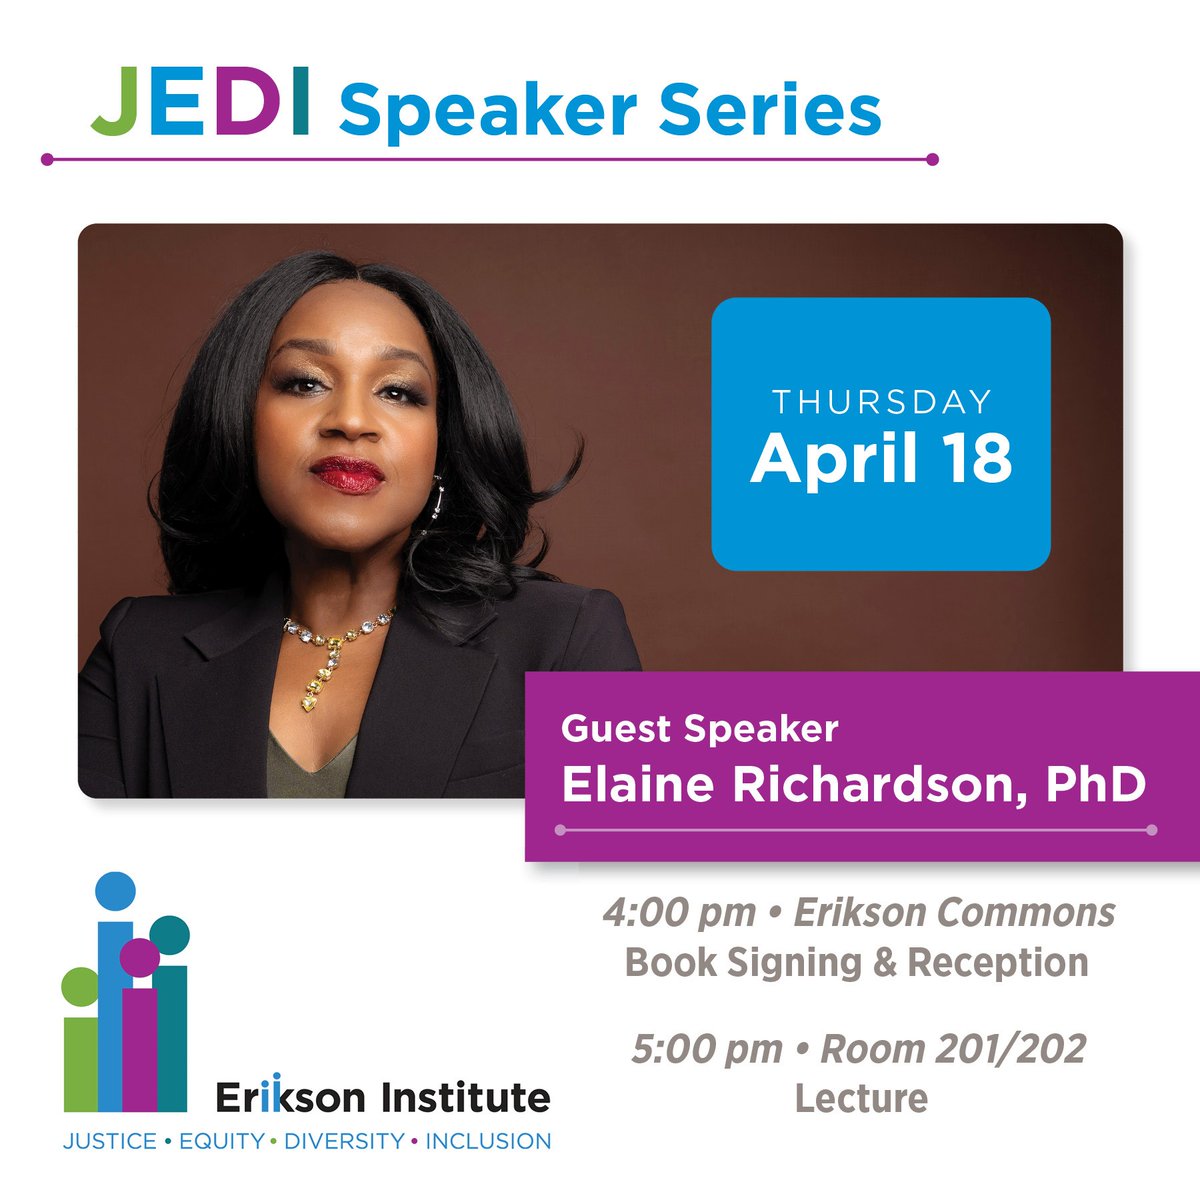 Erikson's Office of Justice, Equity, Diversity and Inclusion (JEDI) invites you to join us on Thursday, April 18 for a lecture and book signing with scholar and author, Dr. Elaine Richardson. This event is in-person and RSVP only. Seats are limited. RSVP: bit.ly/3VN6HsQ